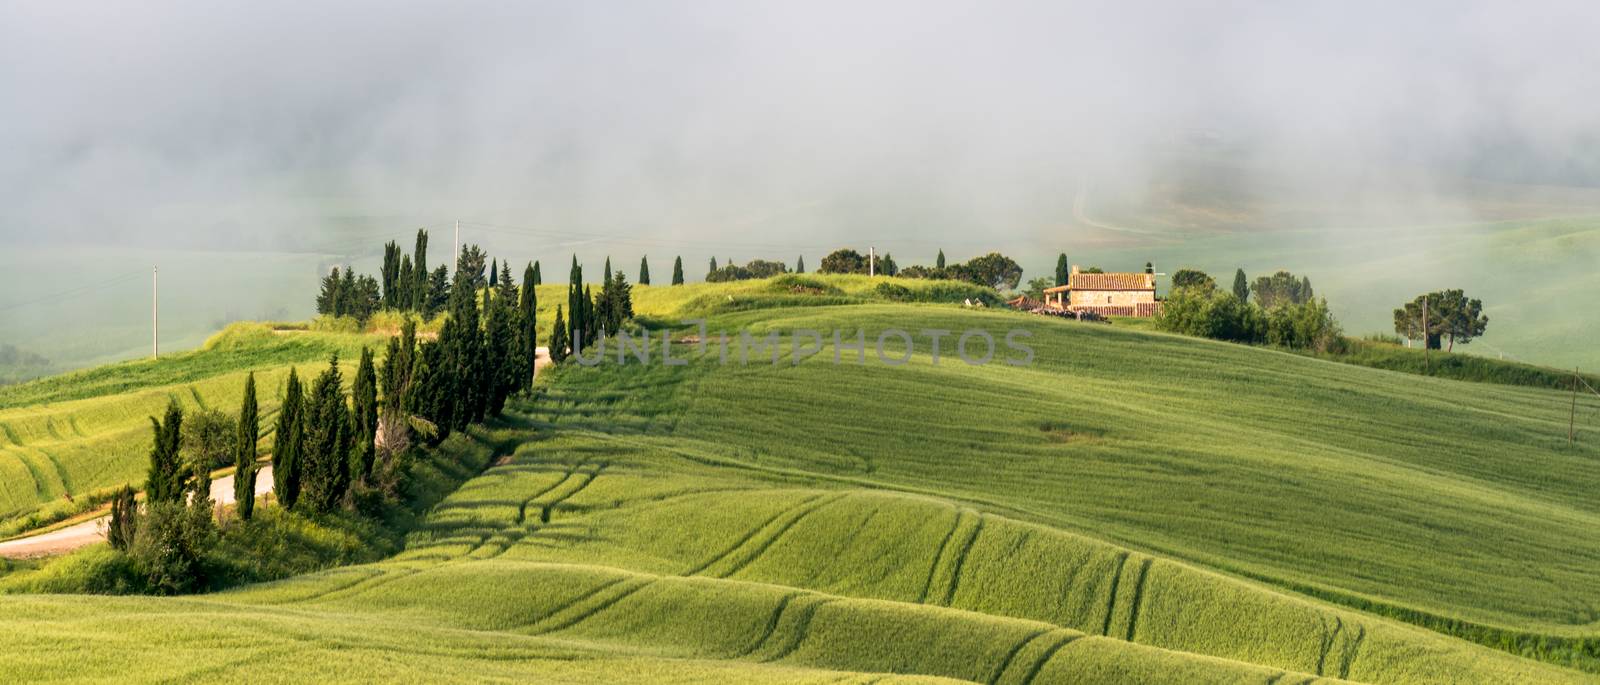 VAL D'ORCIA, TUSCANY/ITALY - MAY 22 : Scenery of Val d'Orcia in Tuscany on May 22, 2013